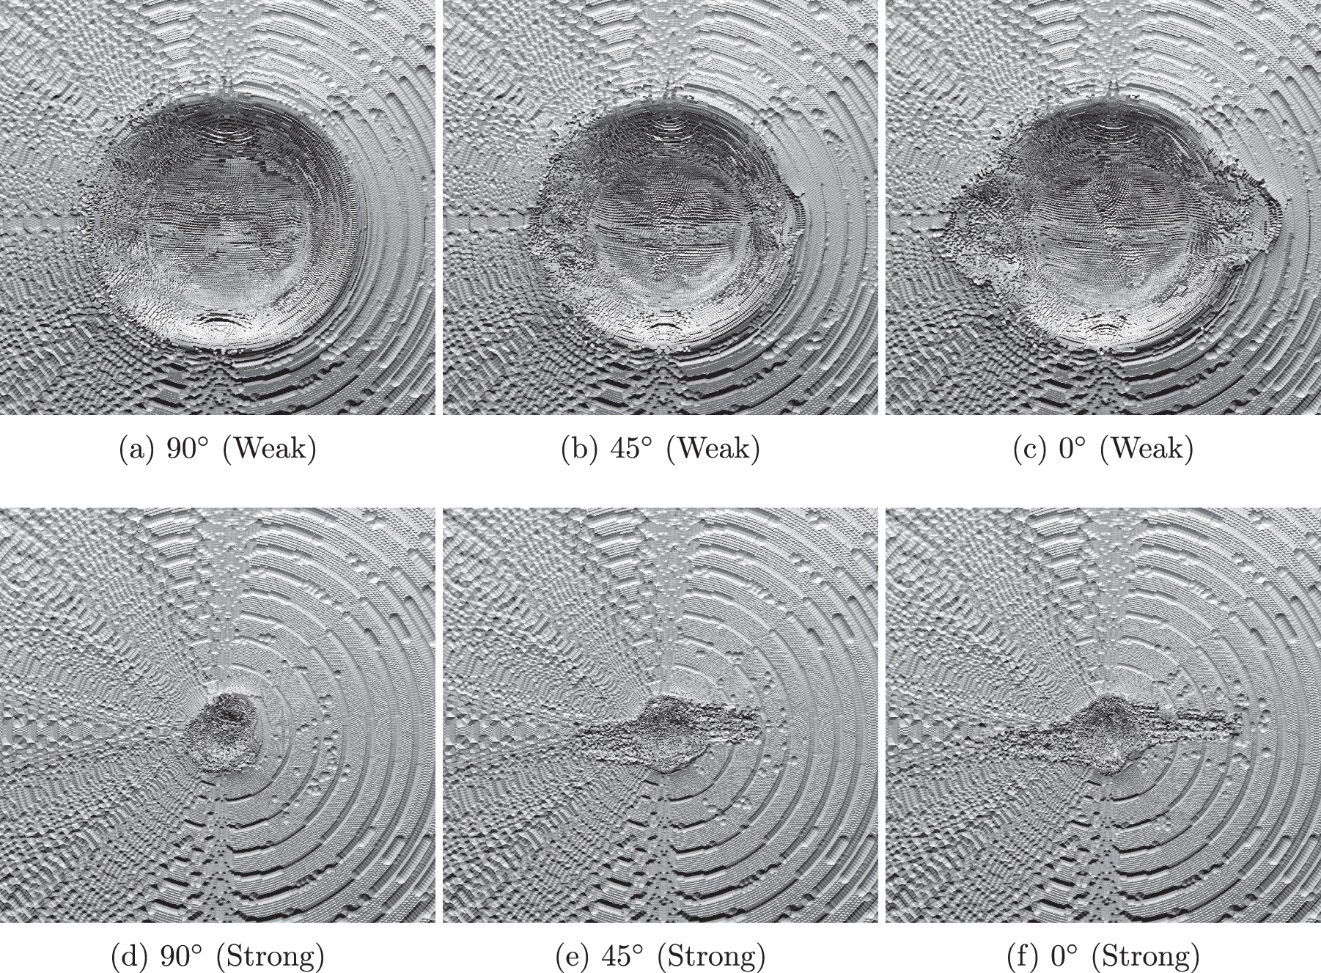 Six renderings from simulations represent circular post-impact craters. On an asteroid with weak composition, the crater has roughly four times larger area. Also, on asteroids with stronger surface composition, the impacts at 45- and 0-degree approaches leave trench-like scrapes extending beyond a central crater.